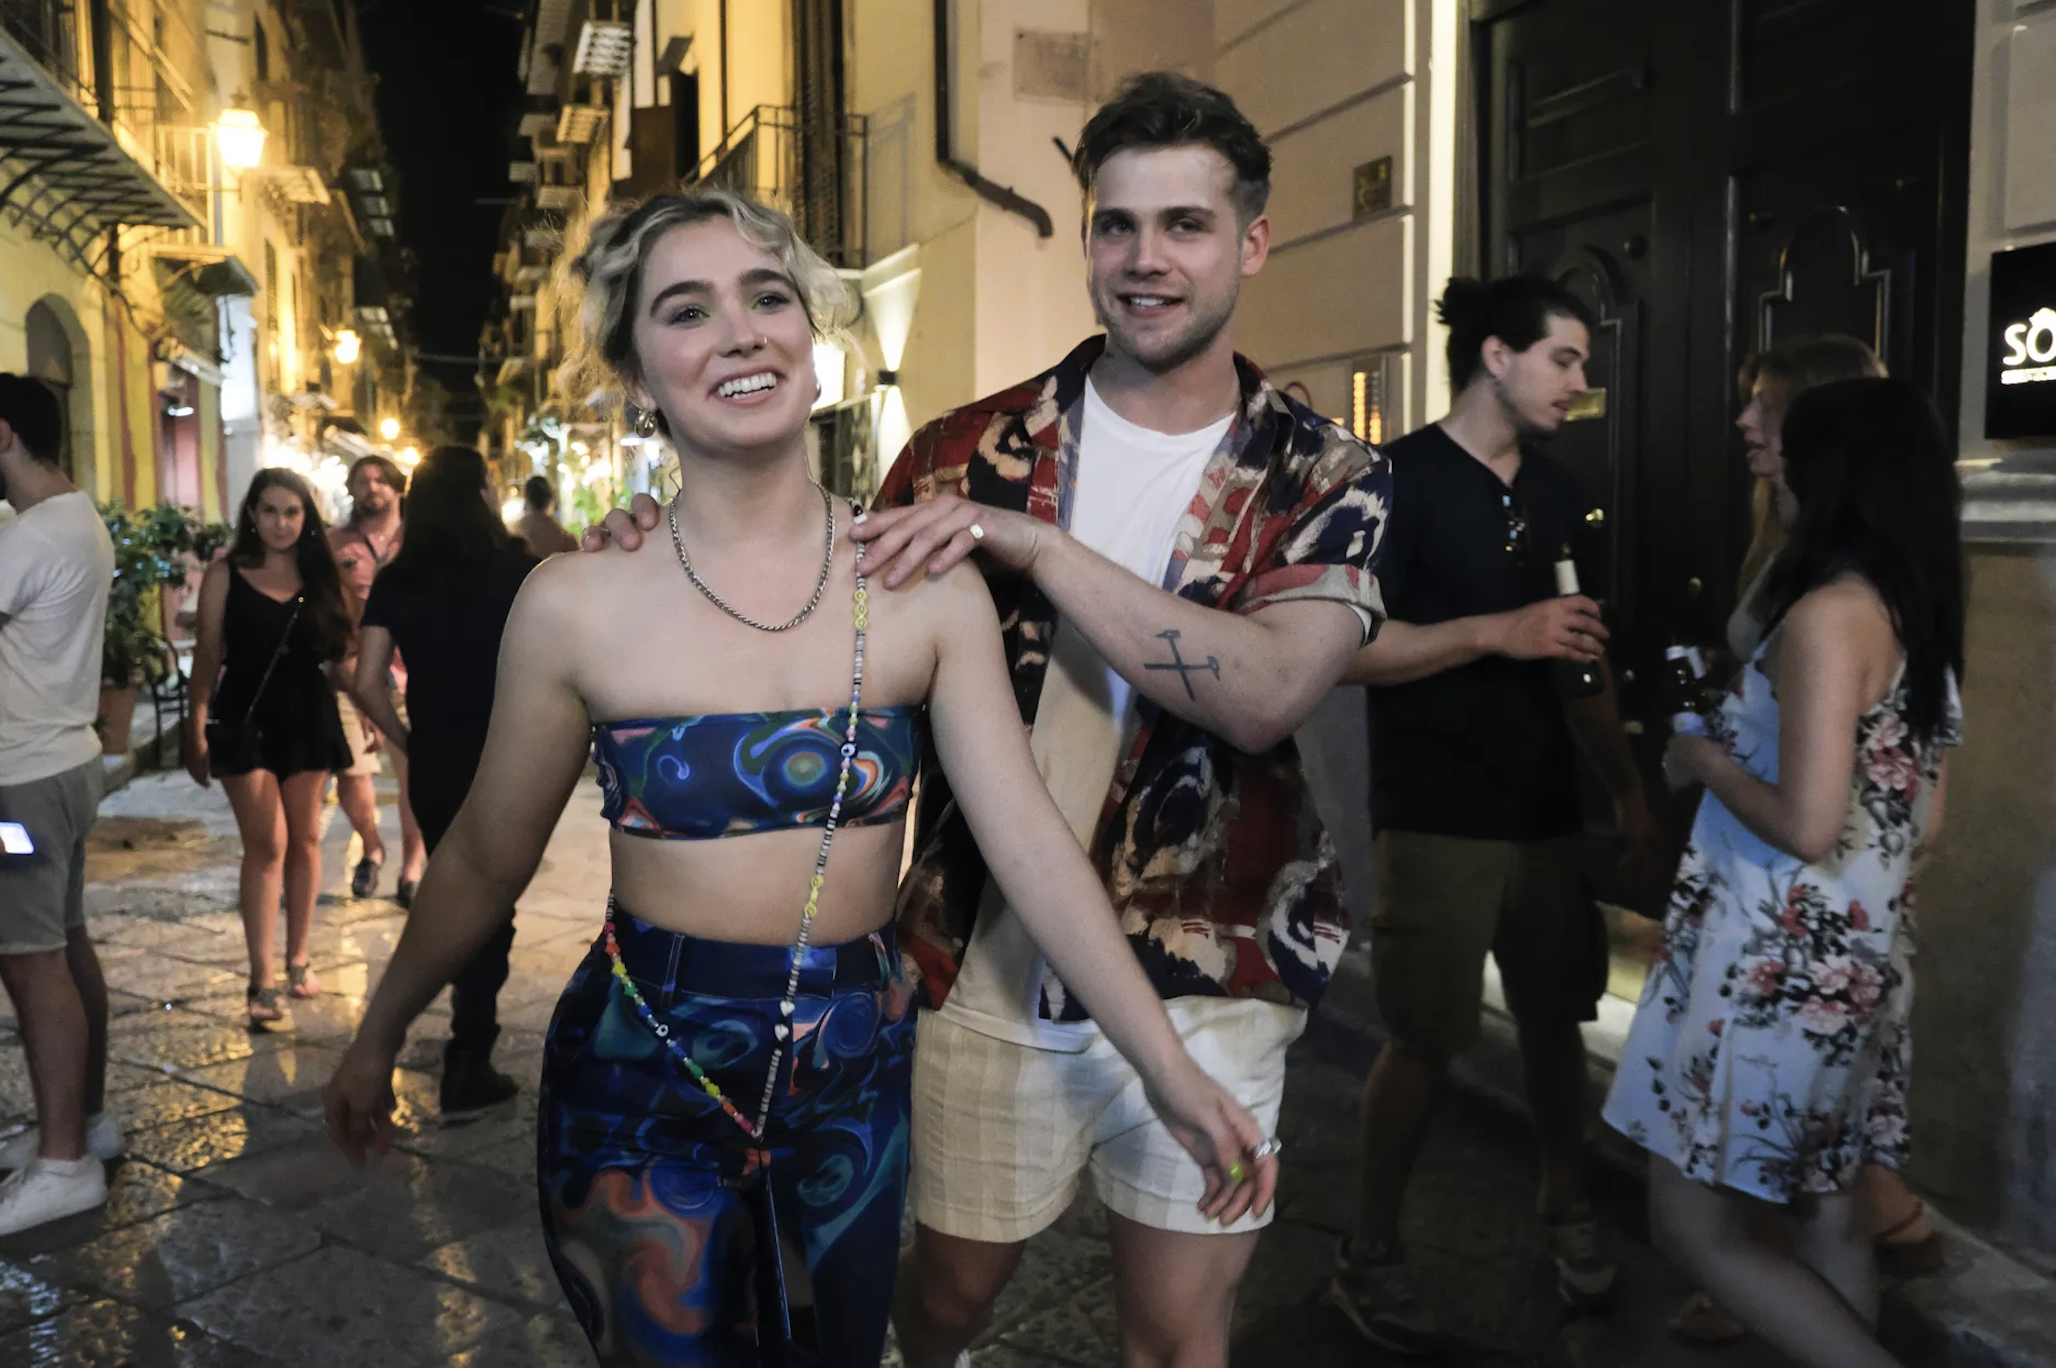 Saoirse Ronan walks with Jack Lowden, who has his hand on her shoulder, on a lively street with people in the background. Ronan wears a patterned crop top and pants